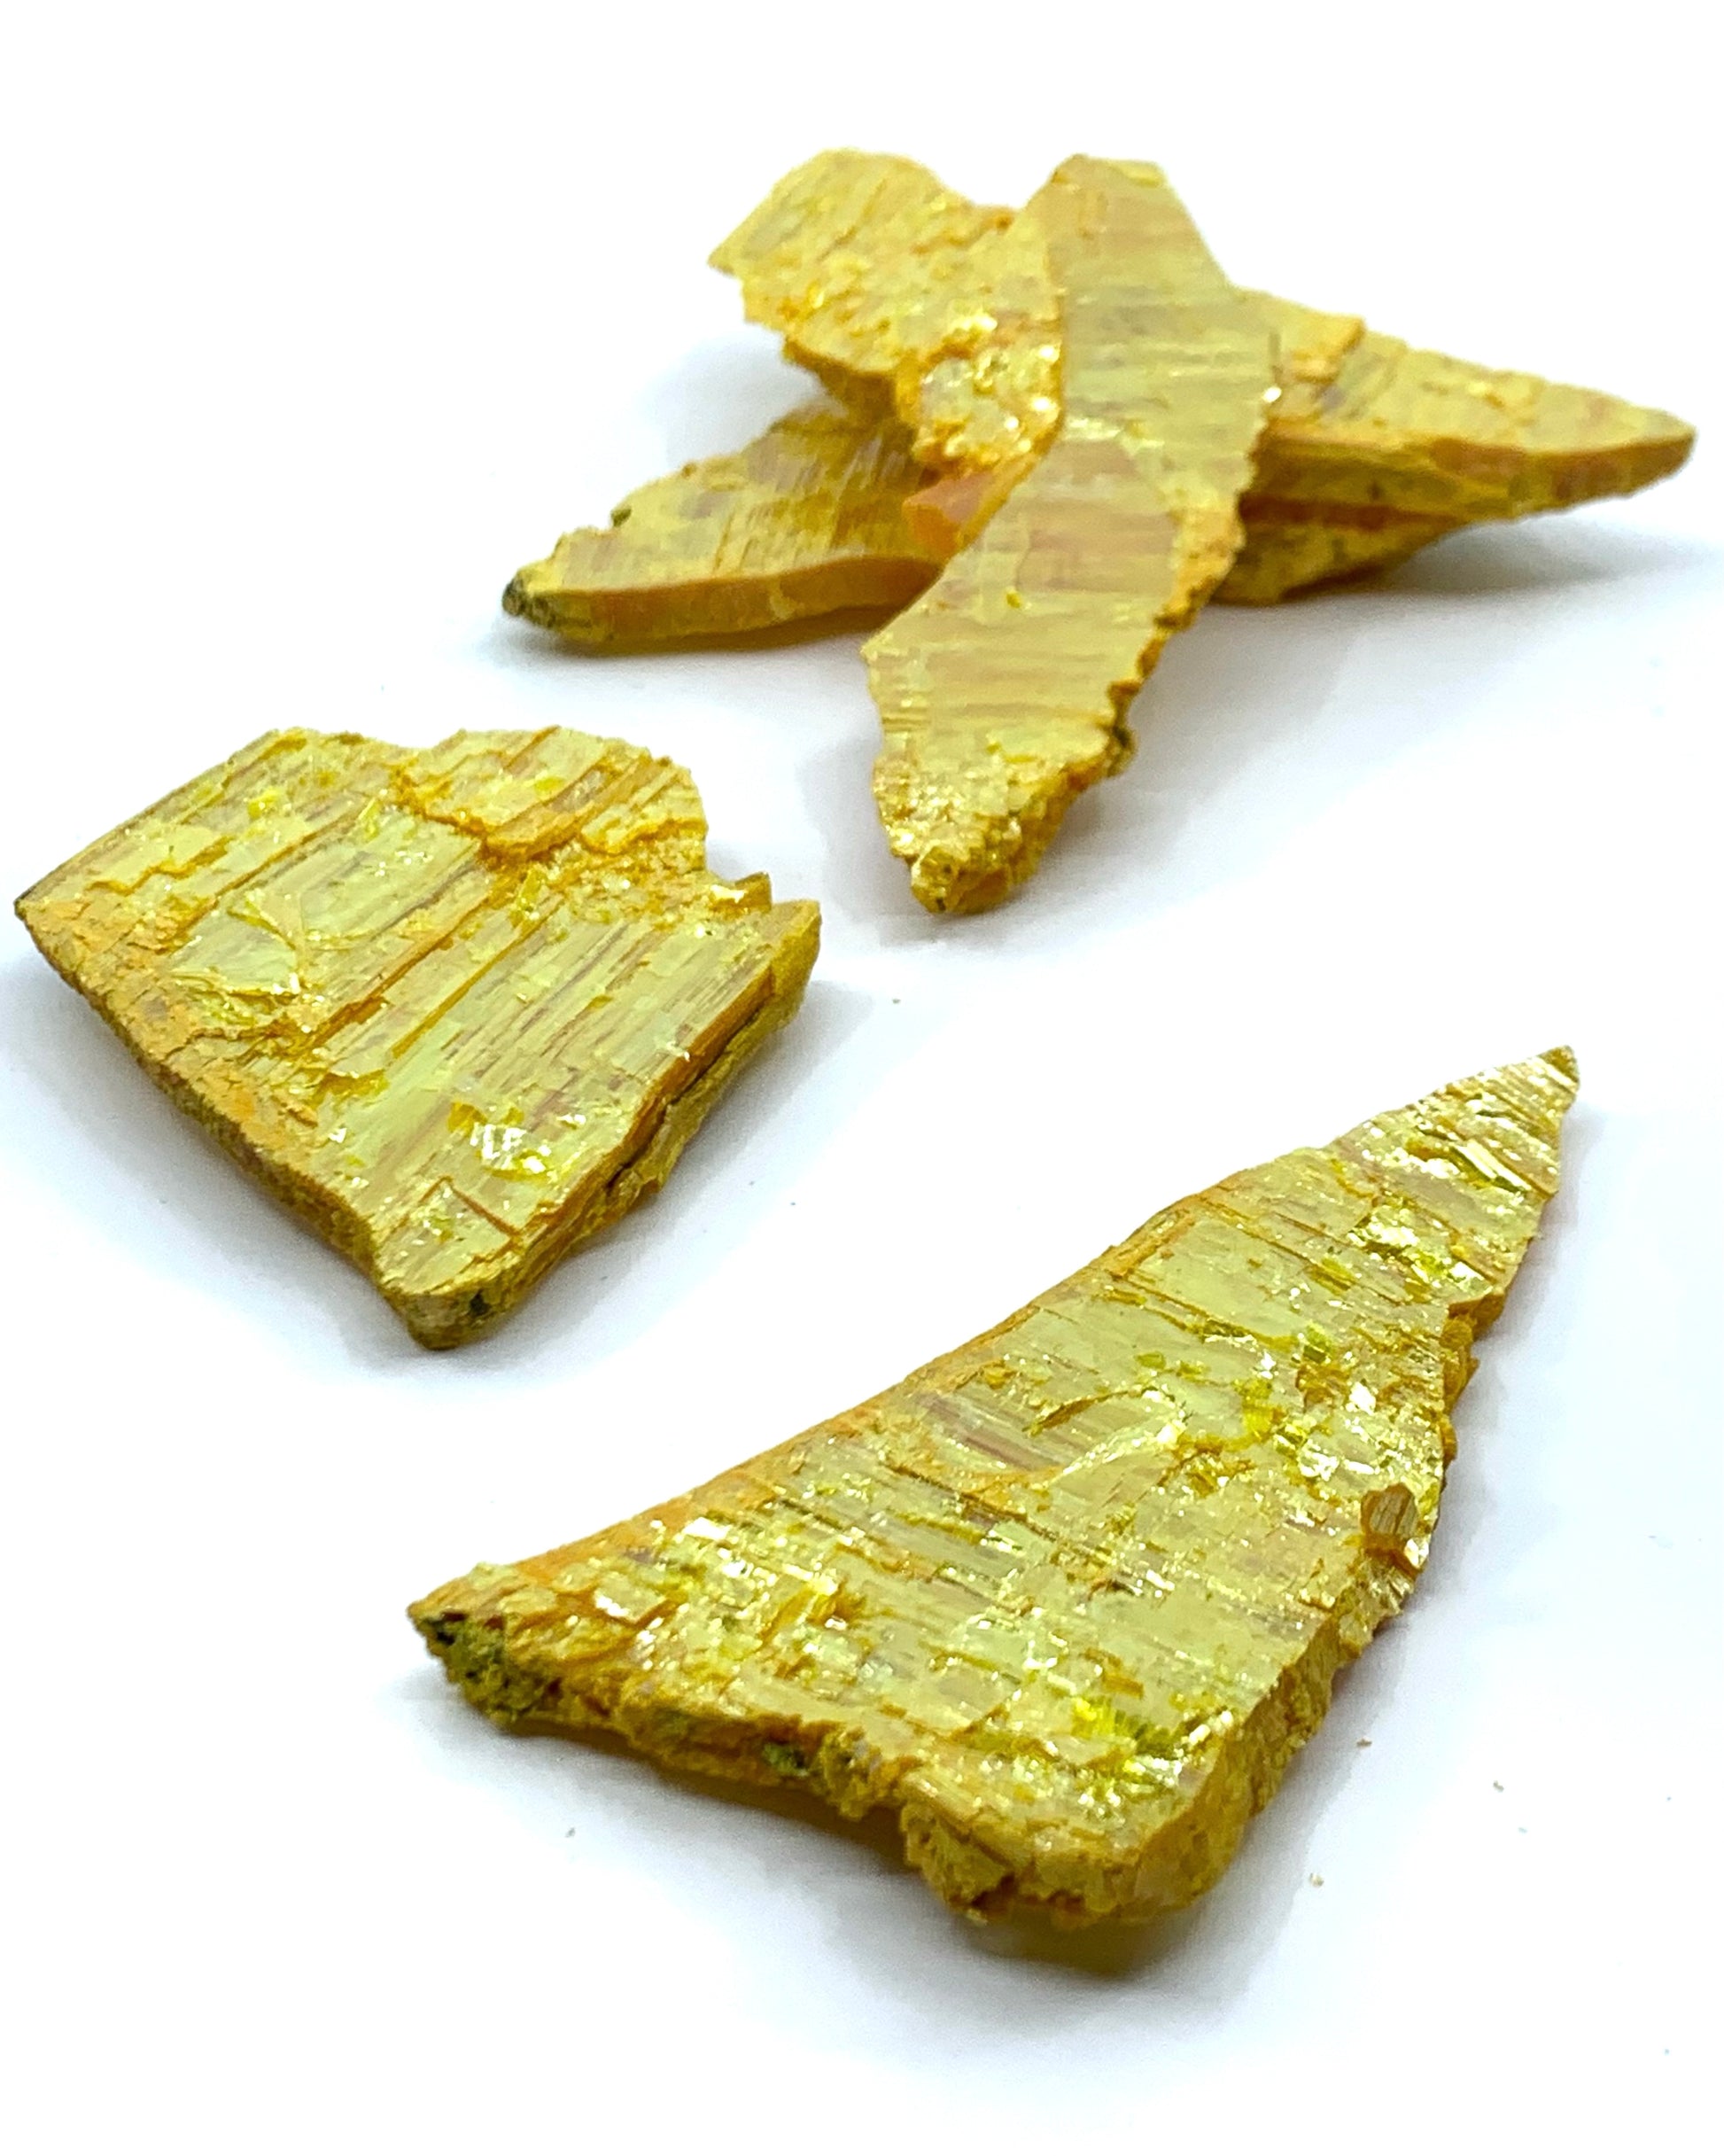 Bright yellow Orpiment mineral. Sizes roughly measuring 3 inches and above